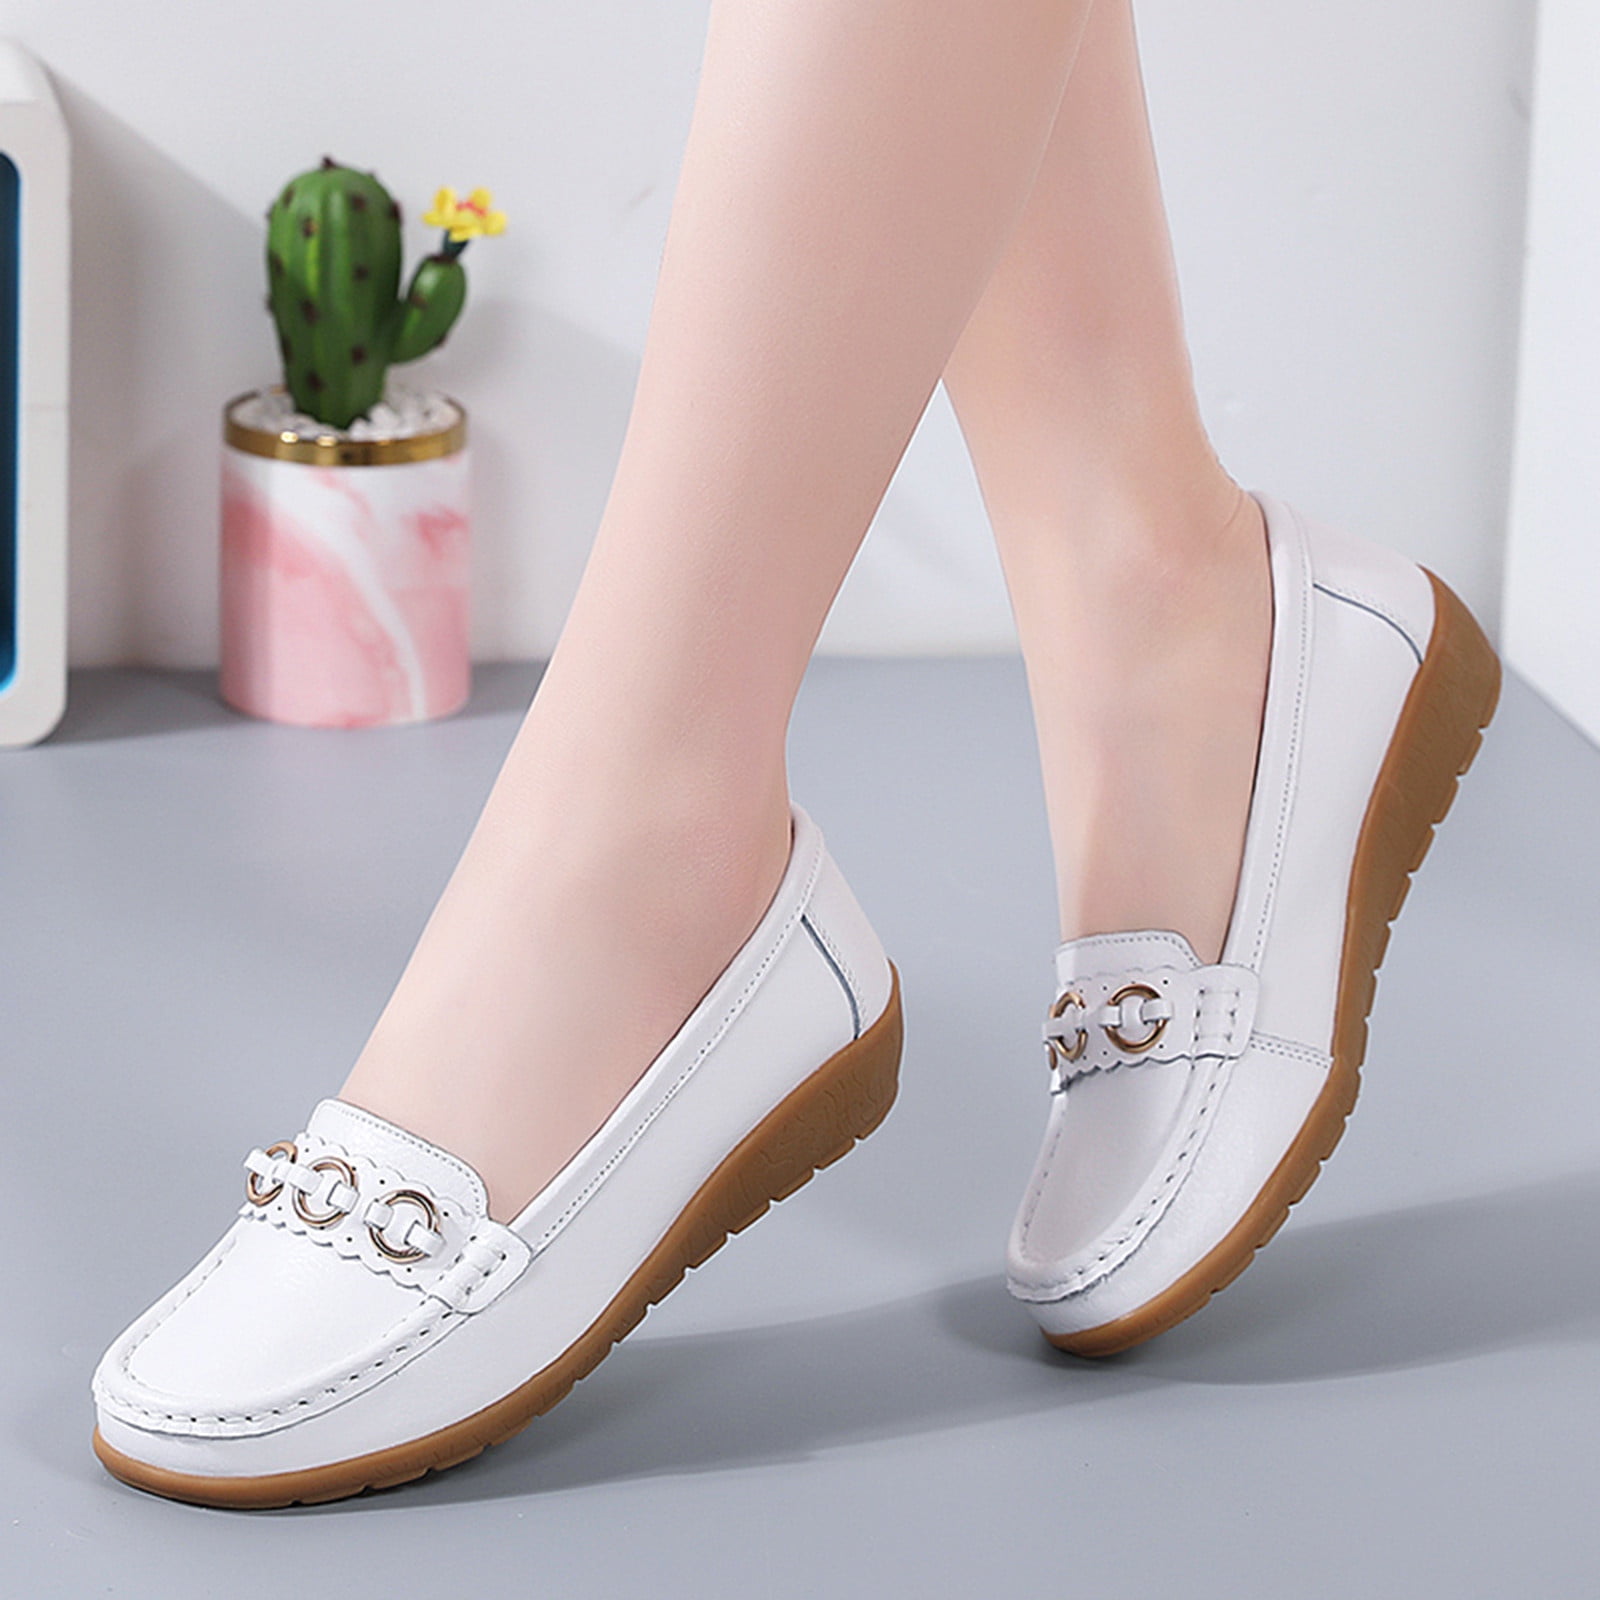 comfortable dress shoes for women